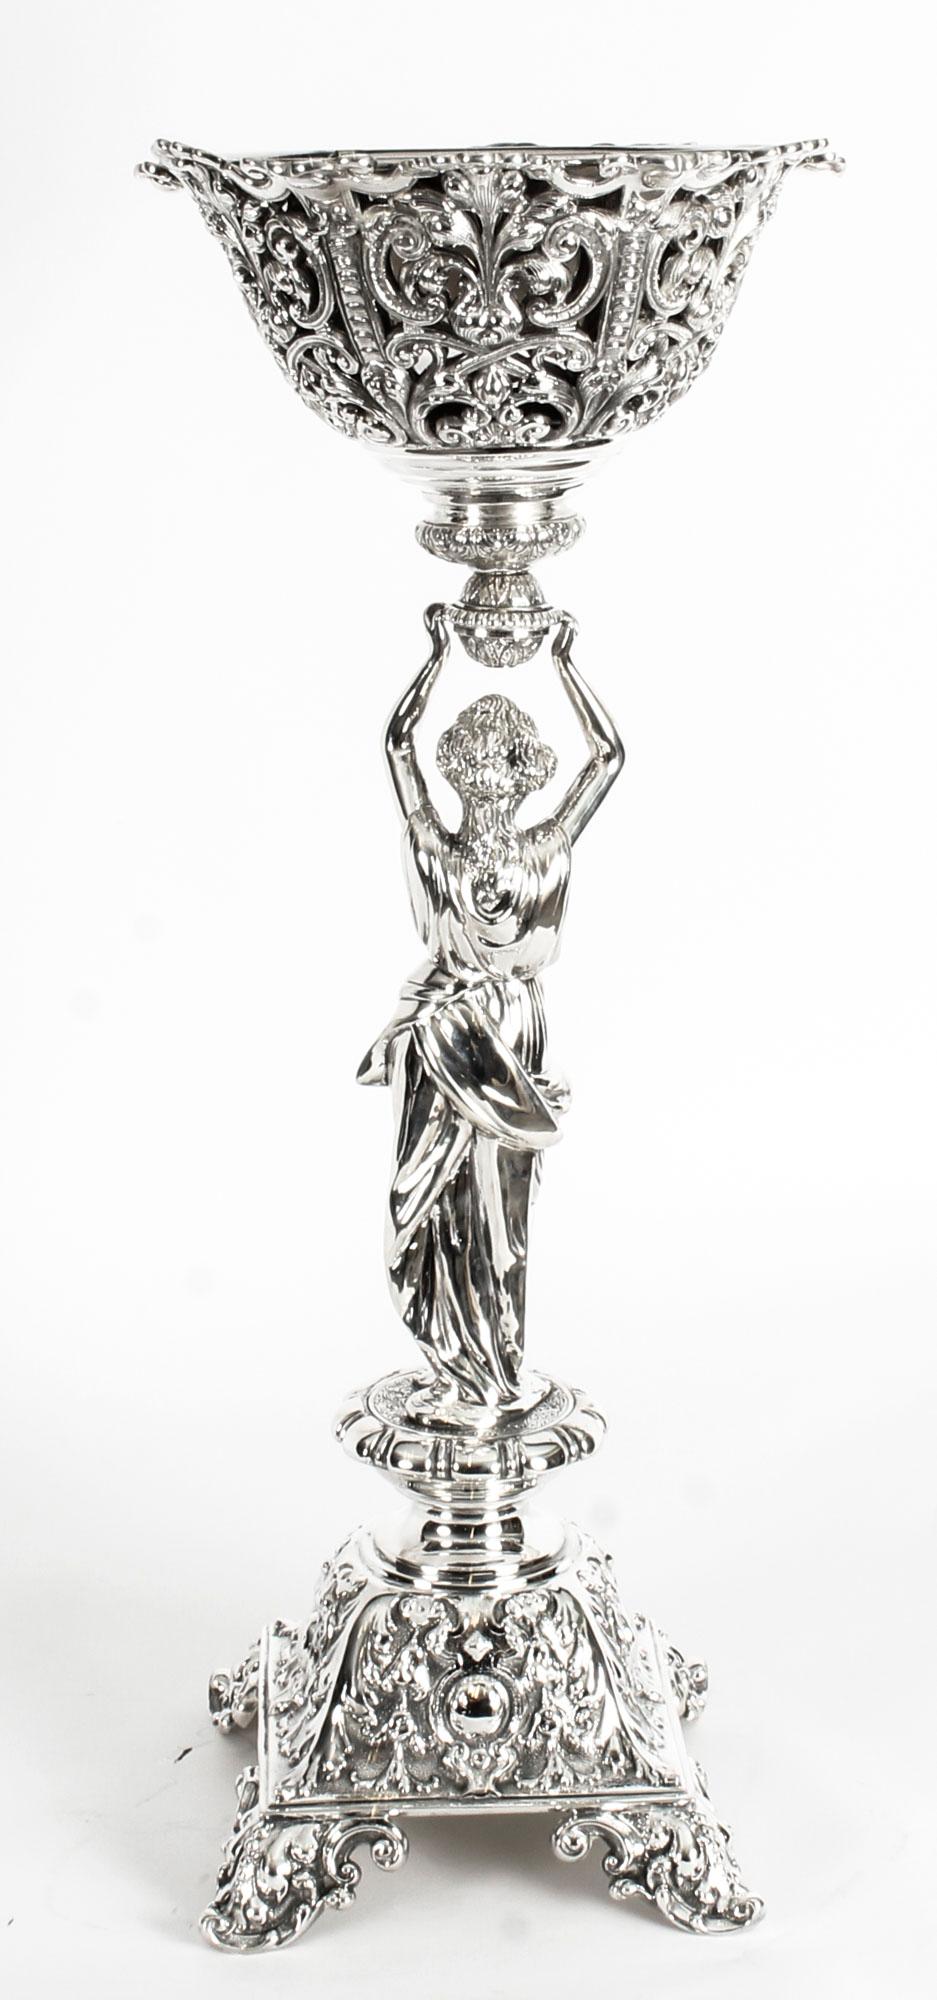 This is a wonderful and rare huge antique English Victorian silver plated bronze figural centrepiece, circa 1880 in date.

It has superb embossed and engraved decoration and features a lady in classical Greco-Roman attire holding aloft a pierced